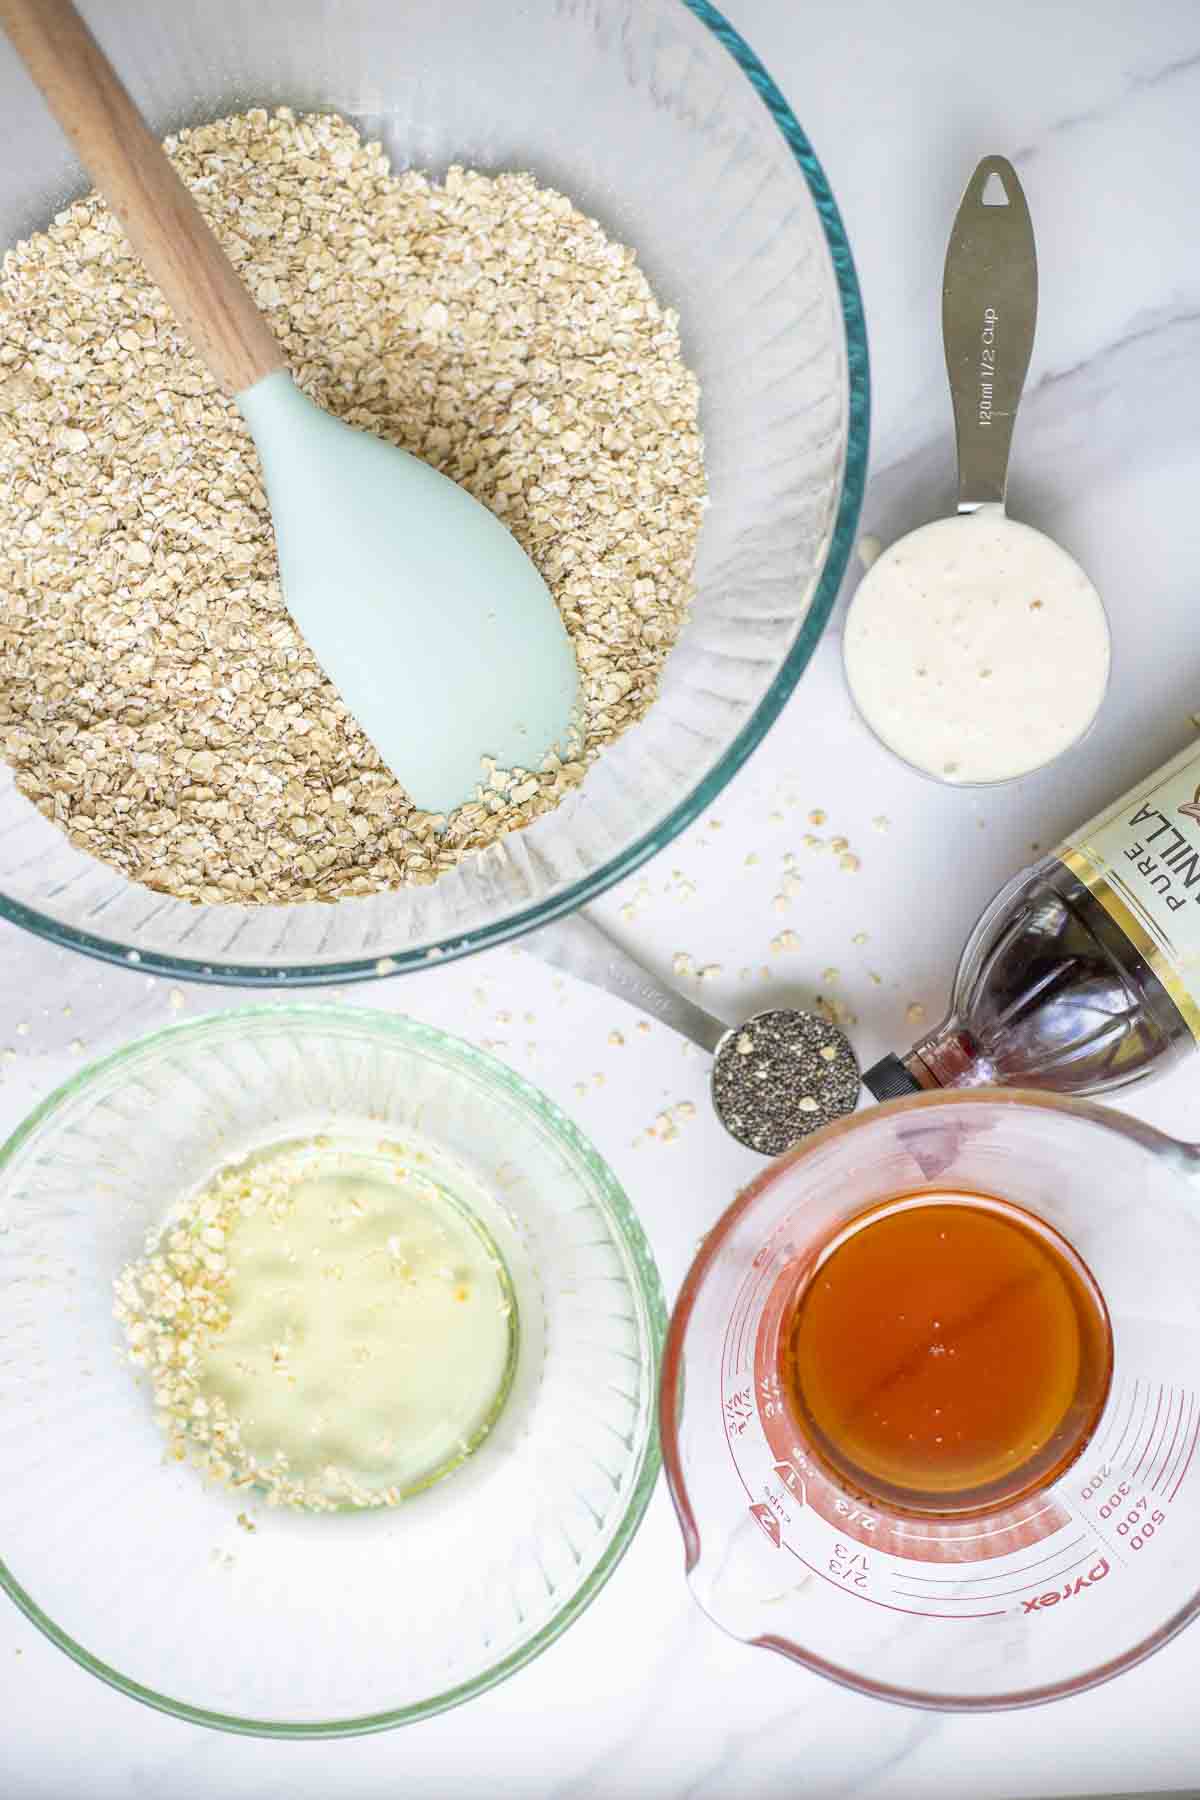 Glass bowls of oats, oil, honey, and measuring cups of sourdough starter and chia seeds and a bottle of vanilla extract are on a marble countertop.